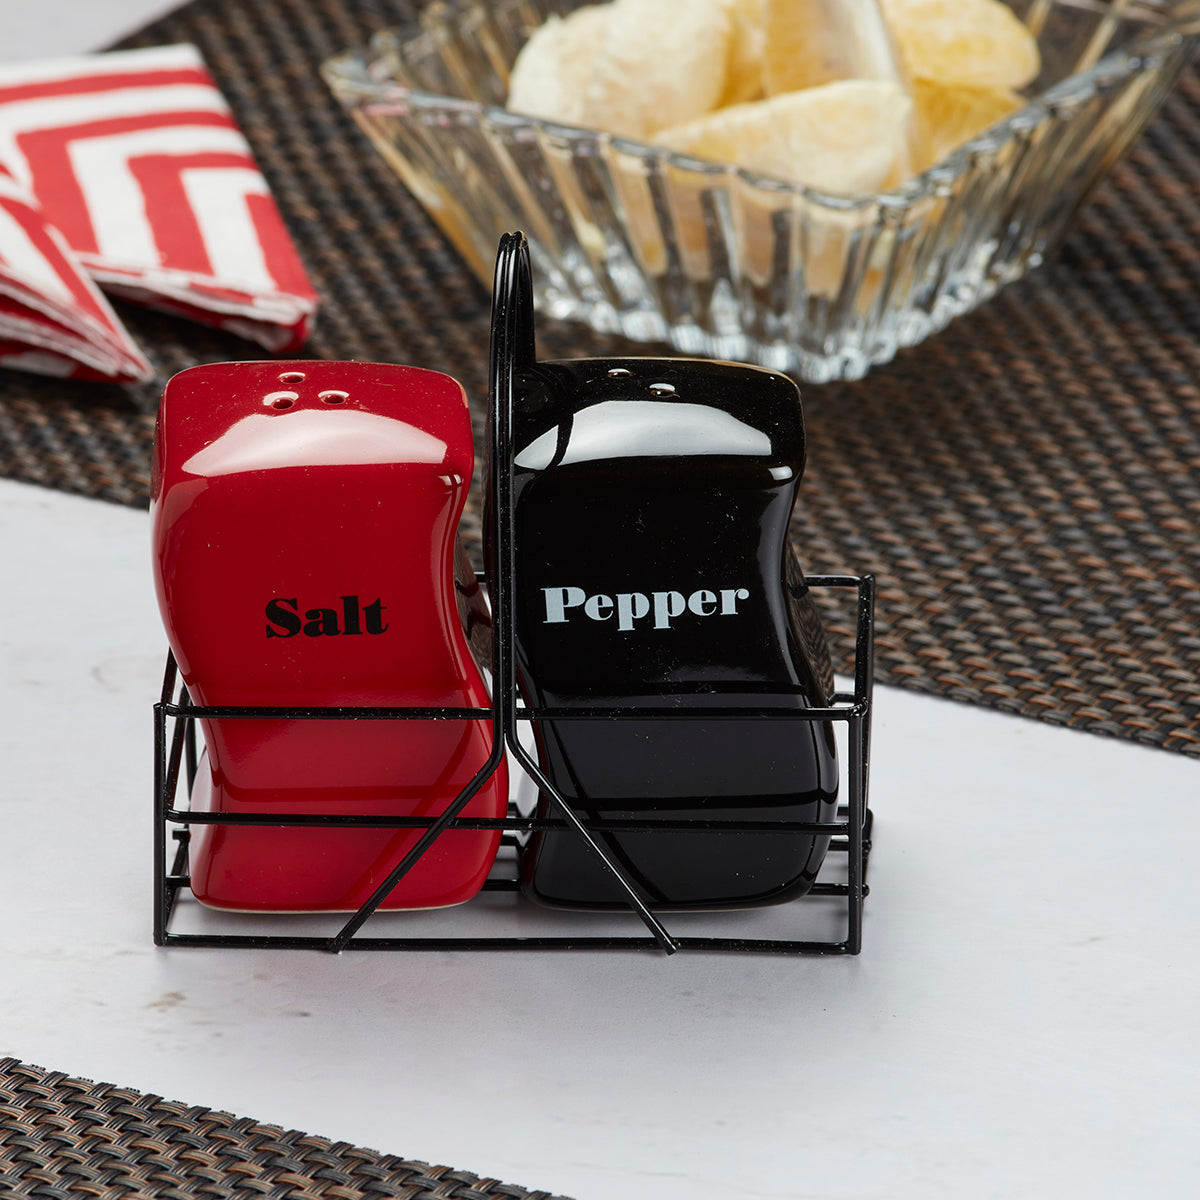 Kookee Ceramic Salt and Pepper Shakers Set with tray for Dining Table used as Namak Dhani, Shaker, Sprinkler, Spices Dispenser for Home, Kitchen and Restaurant, Red/Black (8533)